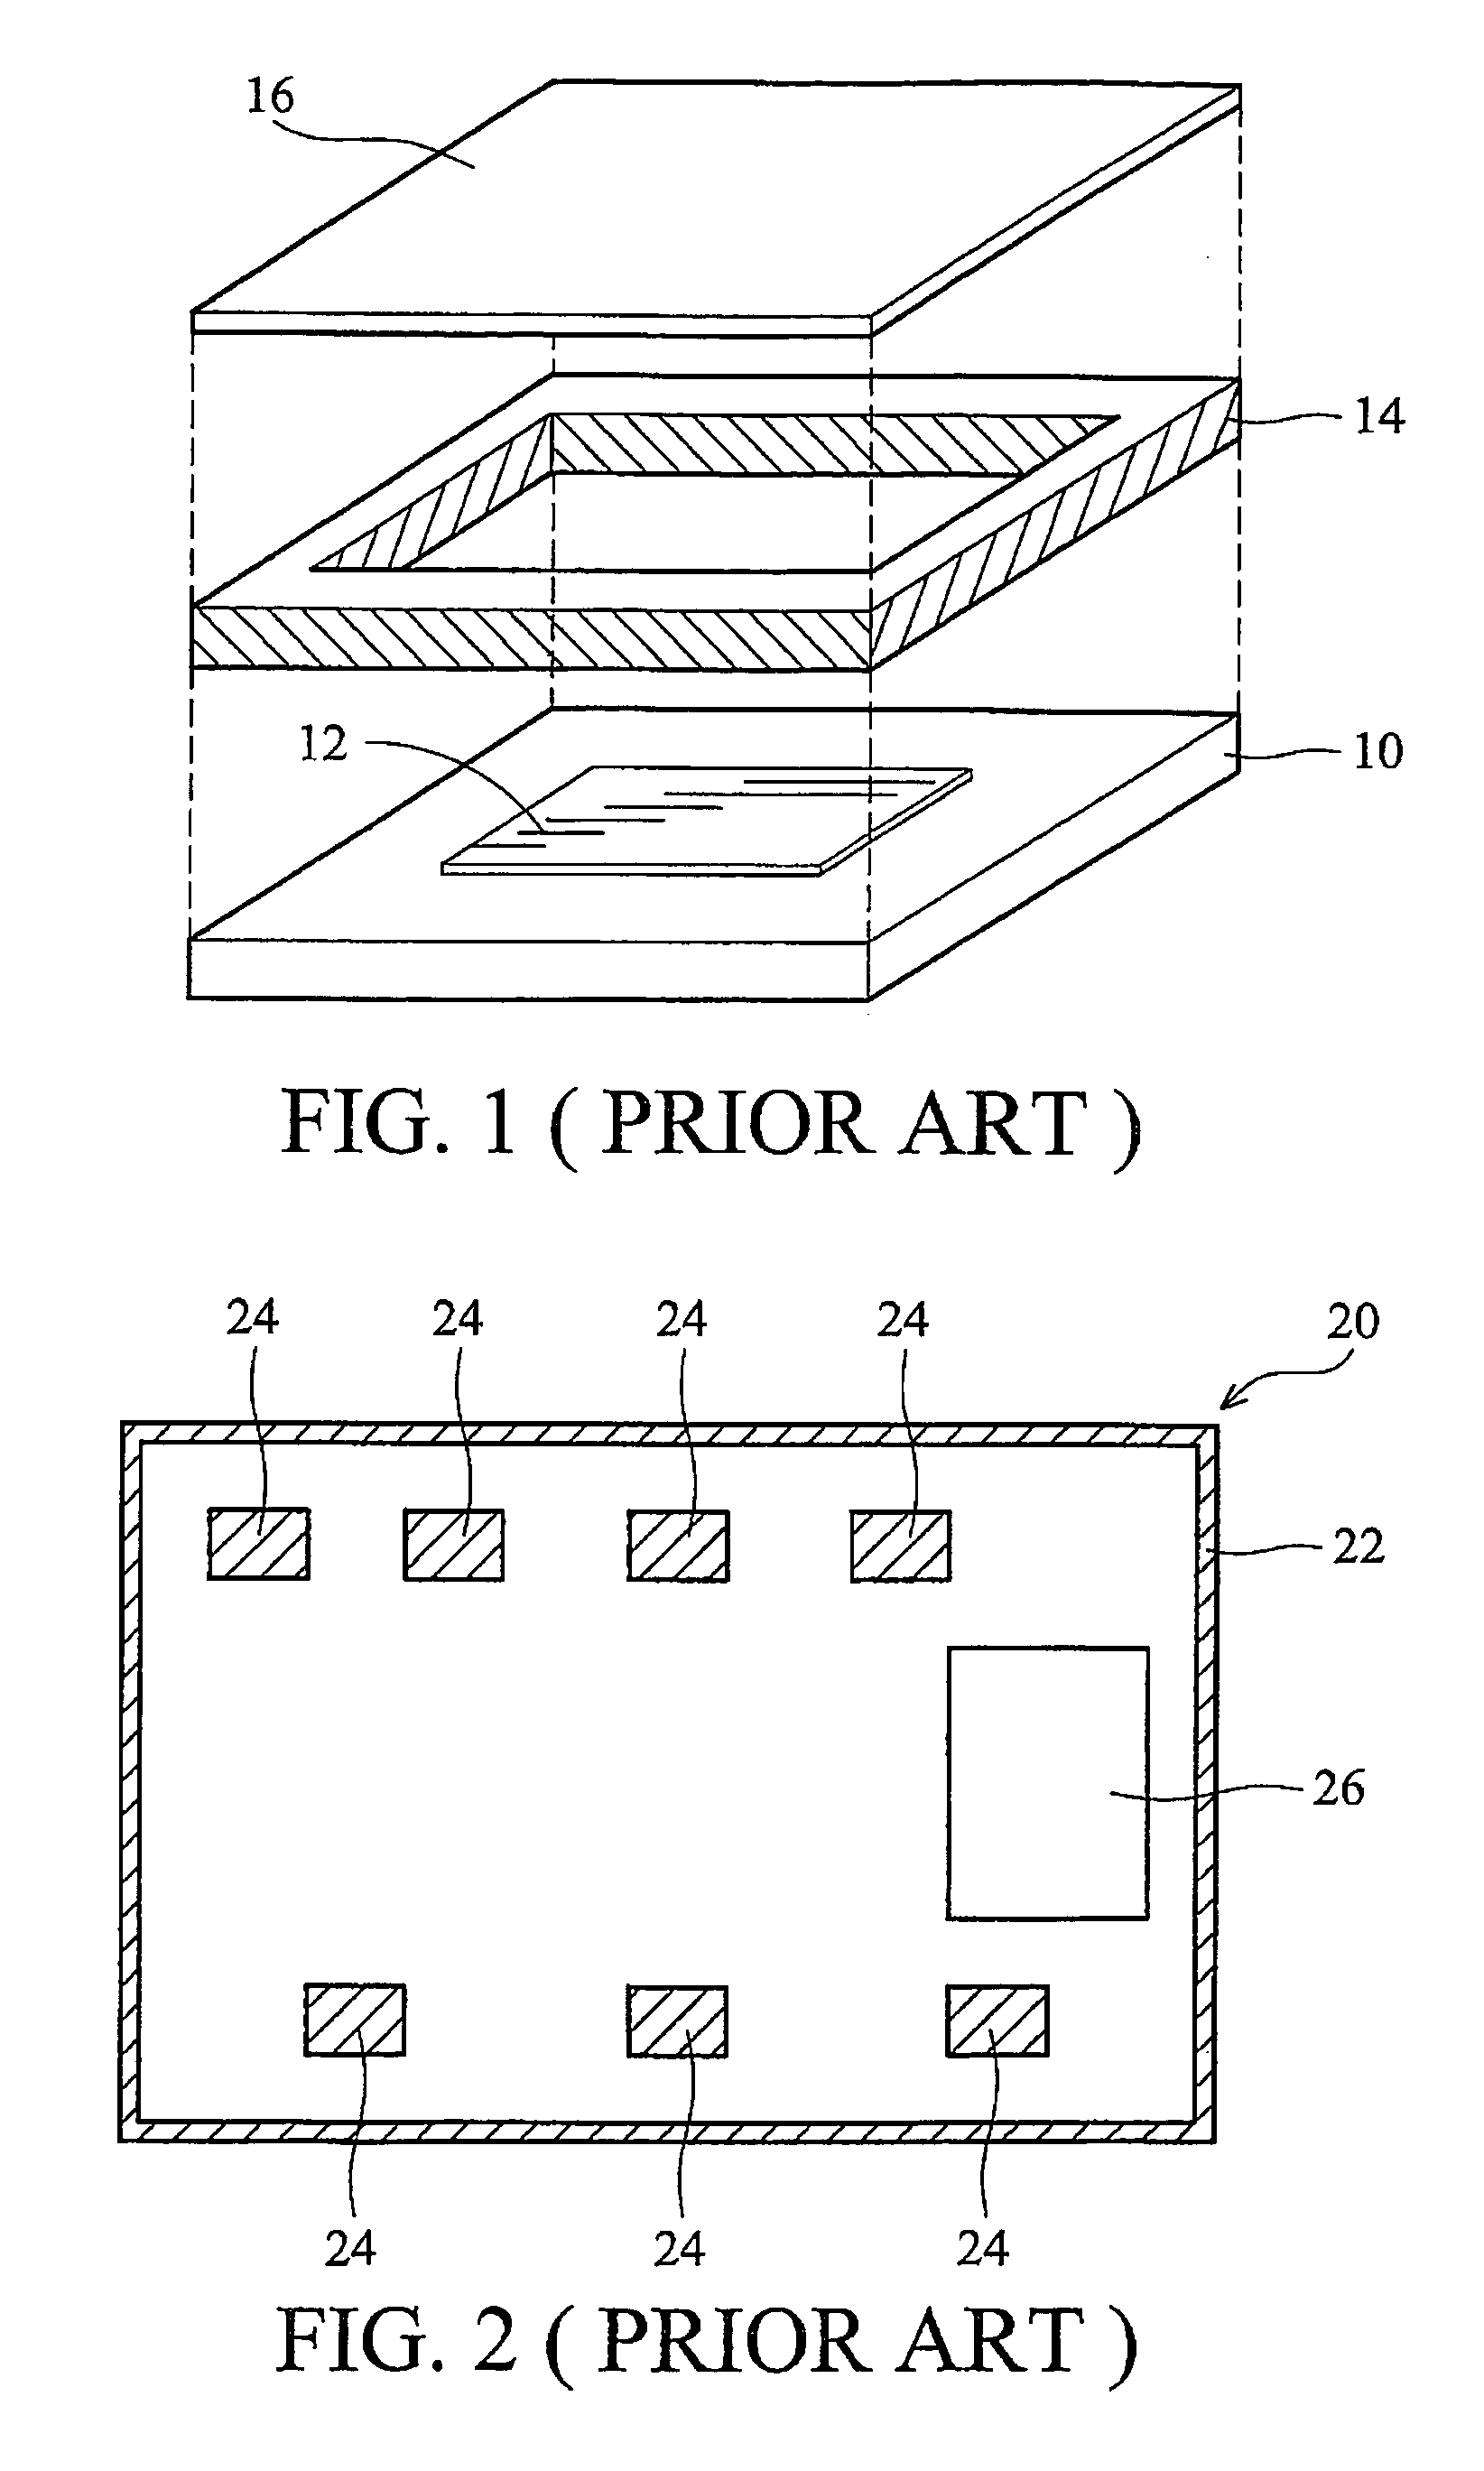 Seal ring structure for radio frequency integrated circuits